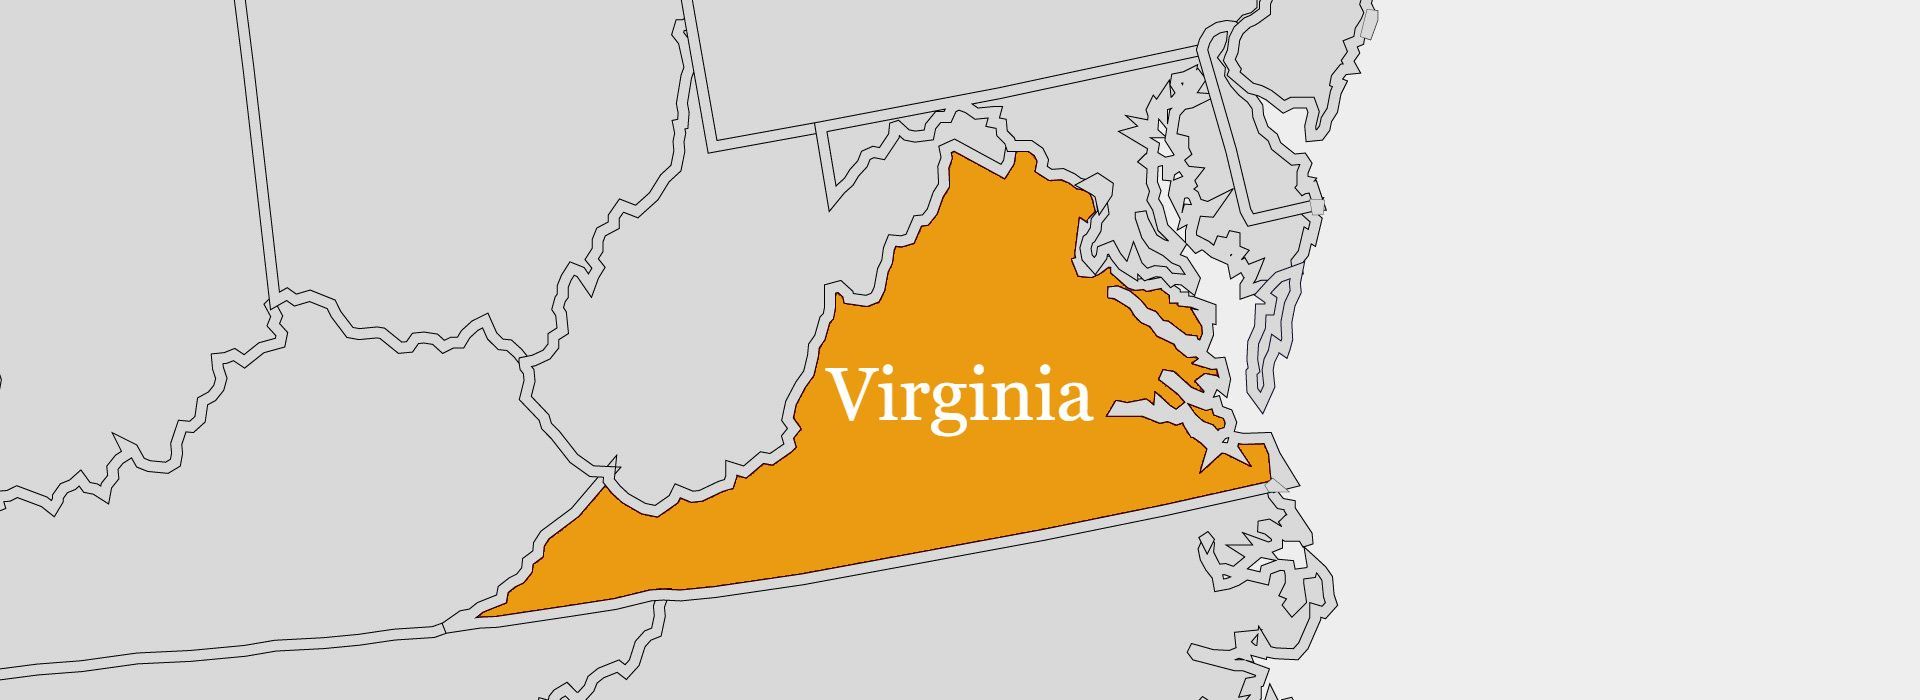 a map of virginia with the state highlighted in orange.